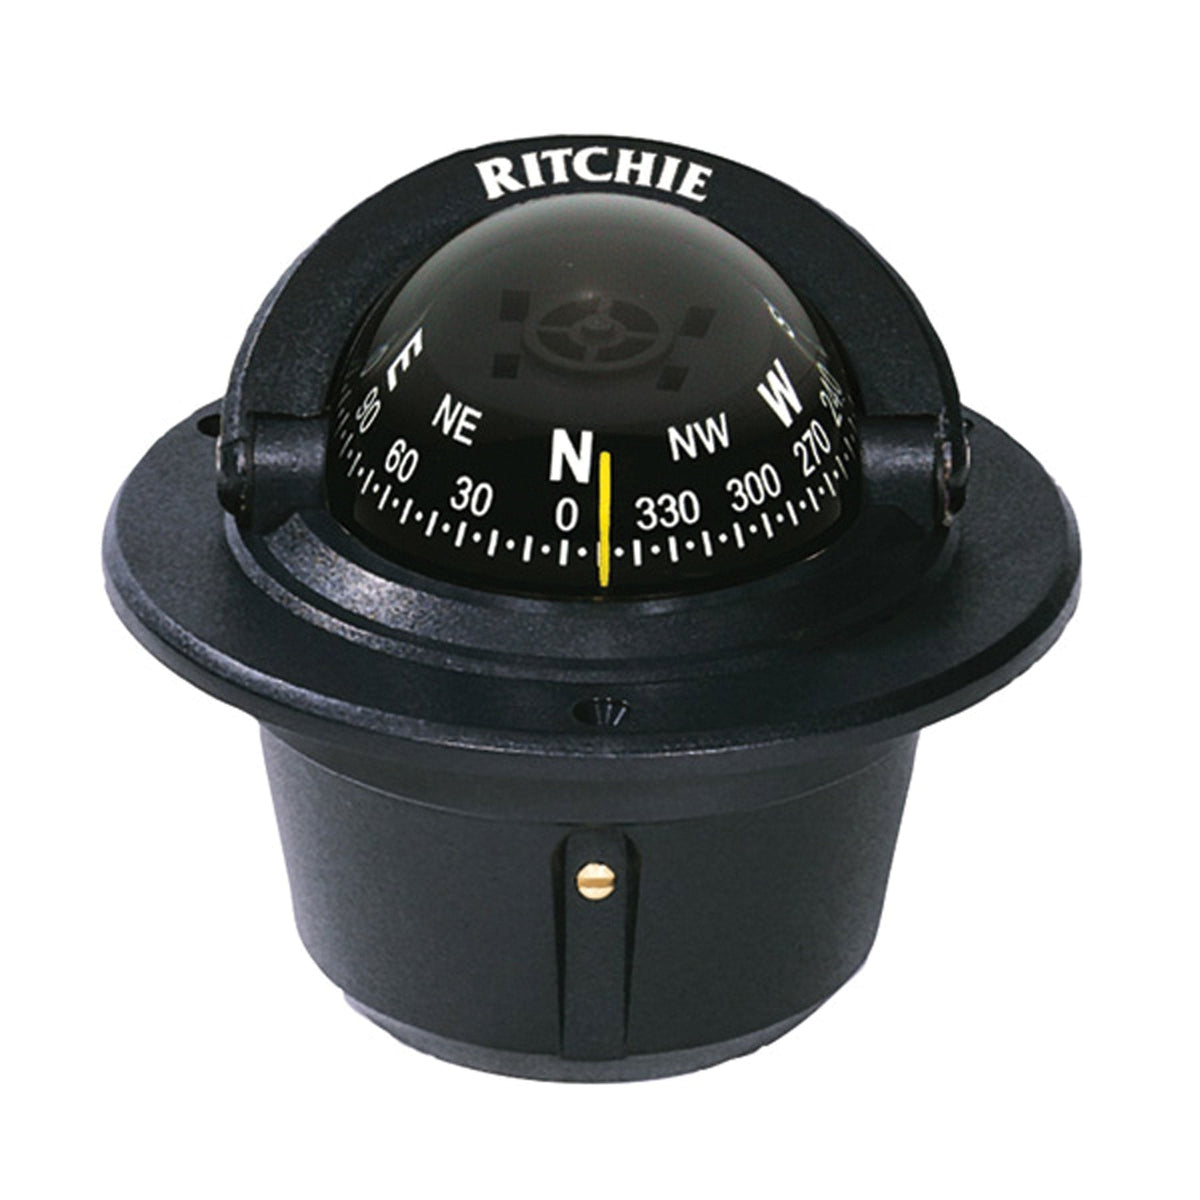 Ritchie Compass Qualifies for Free Shipping Ritchie Compass Explorer Compass Flush Mount Black with Black Dial #F-50-1